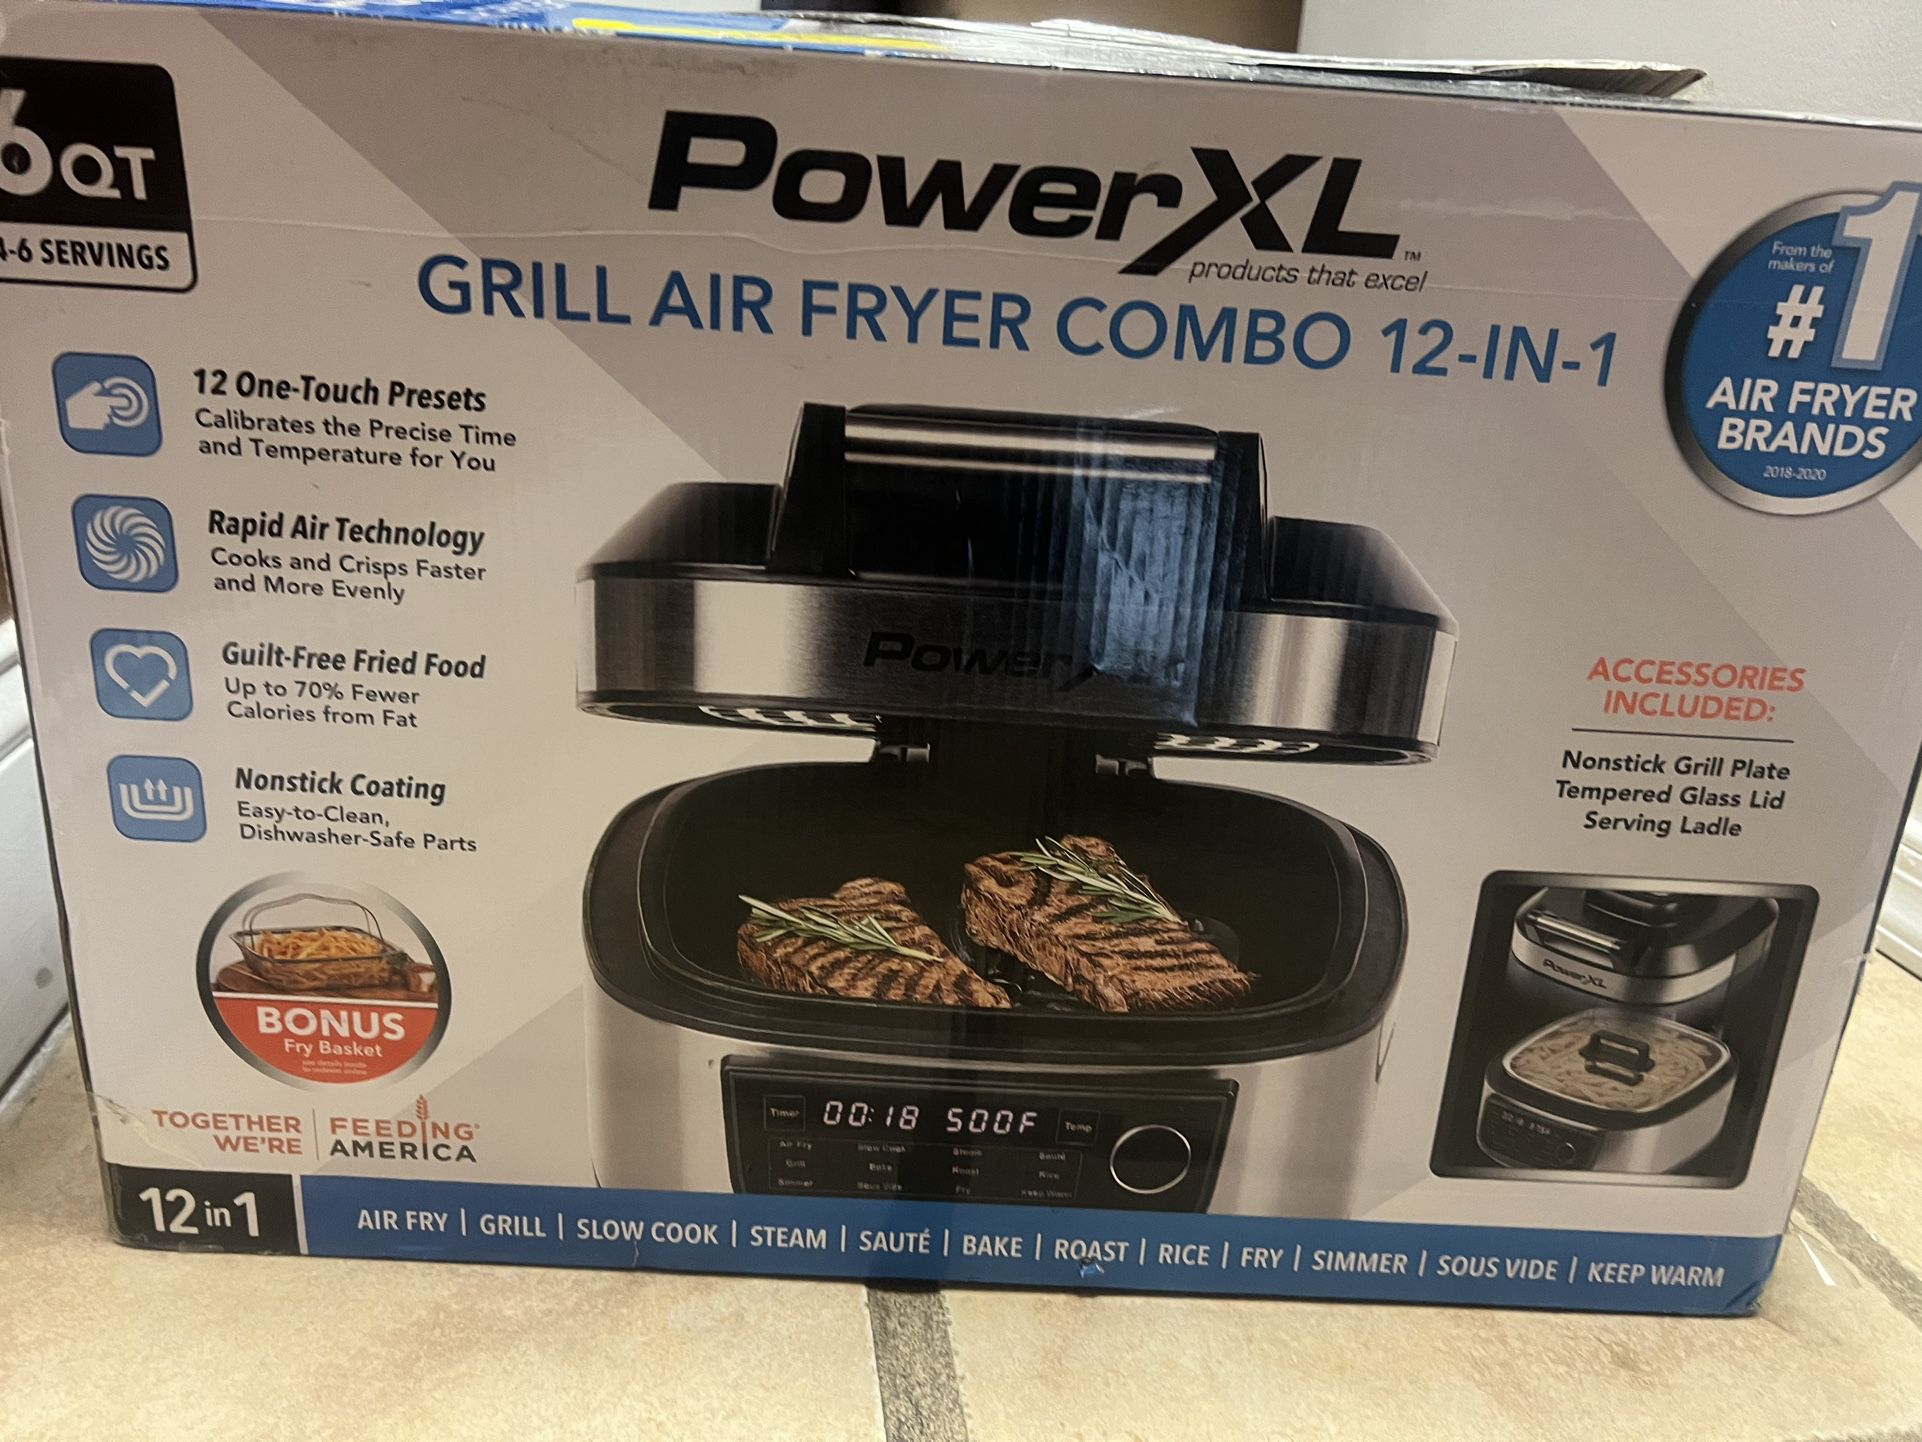 Selling 6 QT Grill Air Fryer Combo - 12-in-1 Indoor Cooker with Stainless Steel Finish